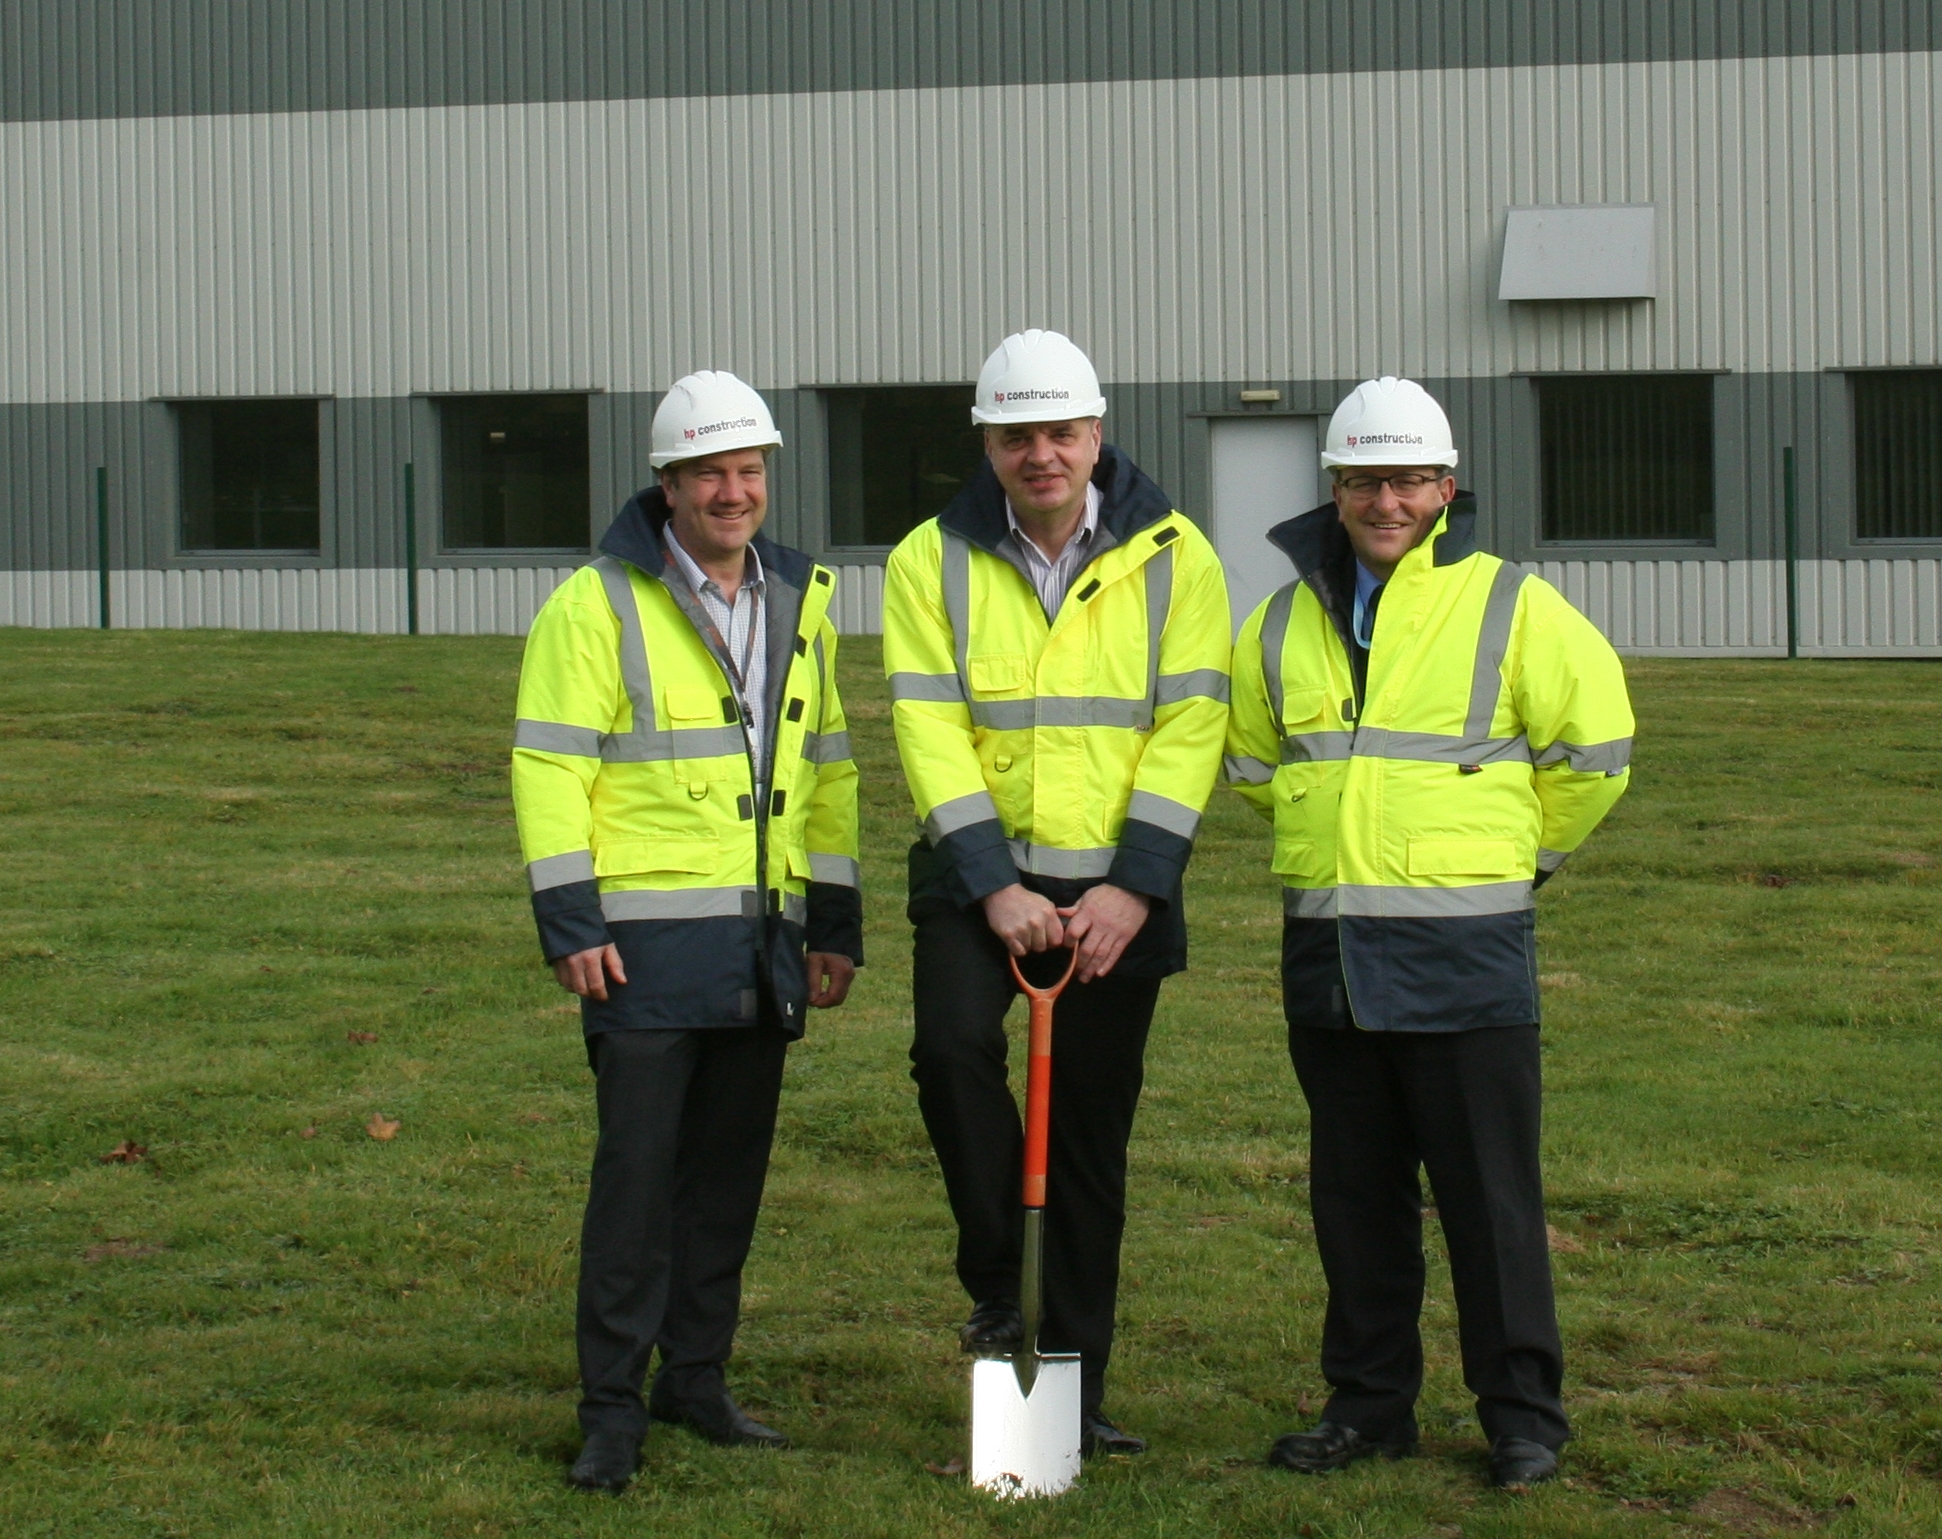 abaco_towcester_uk_hq_expansion_groundbreaking_final.jpg